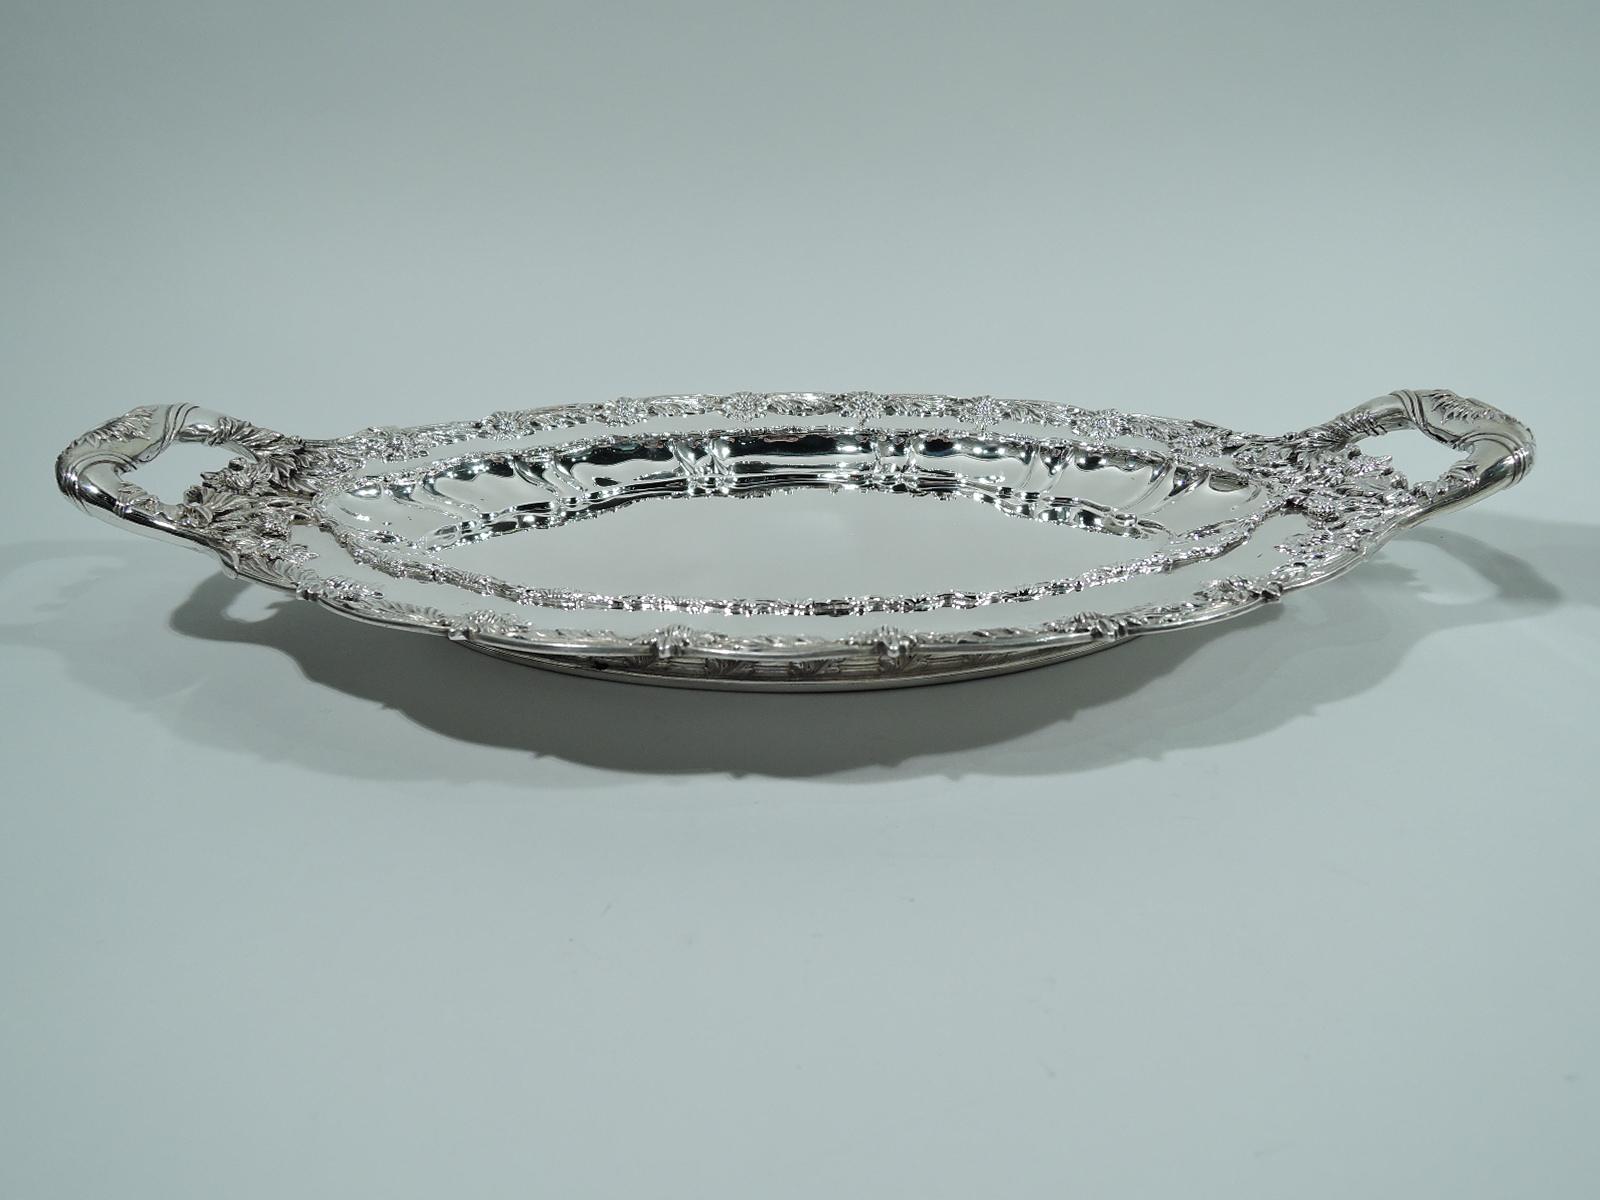 Chrysanthemum sterling silver serving dish. Made by Tiffany & Co. in New York. Ovalish well, curved sides with lobing and applied leaf border, and scalloped rim with the famous chrysanthemum flower heads alternating with leaves. A profusion of